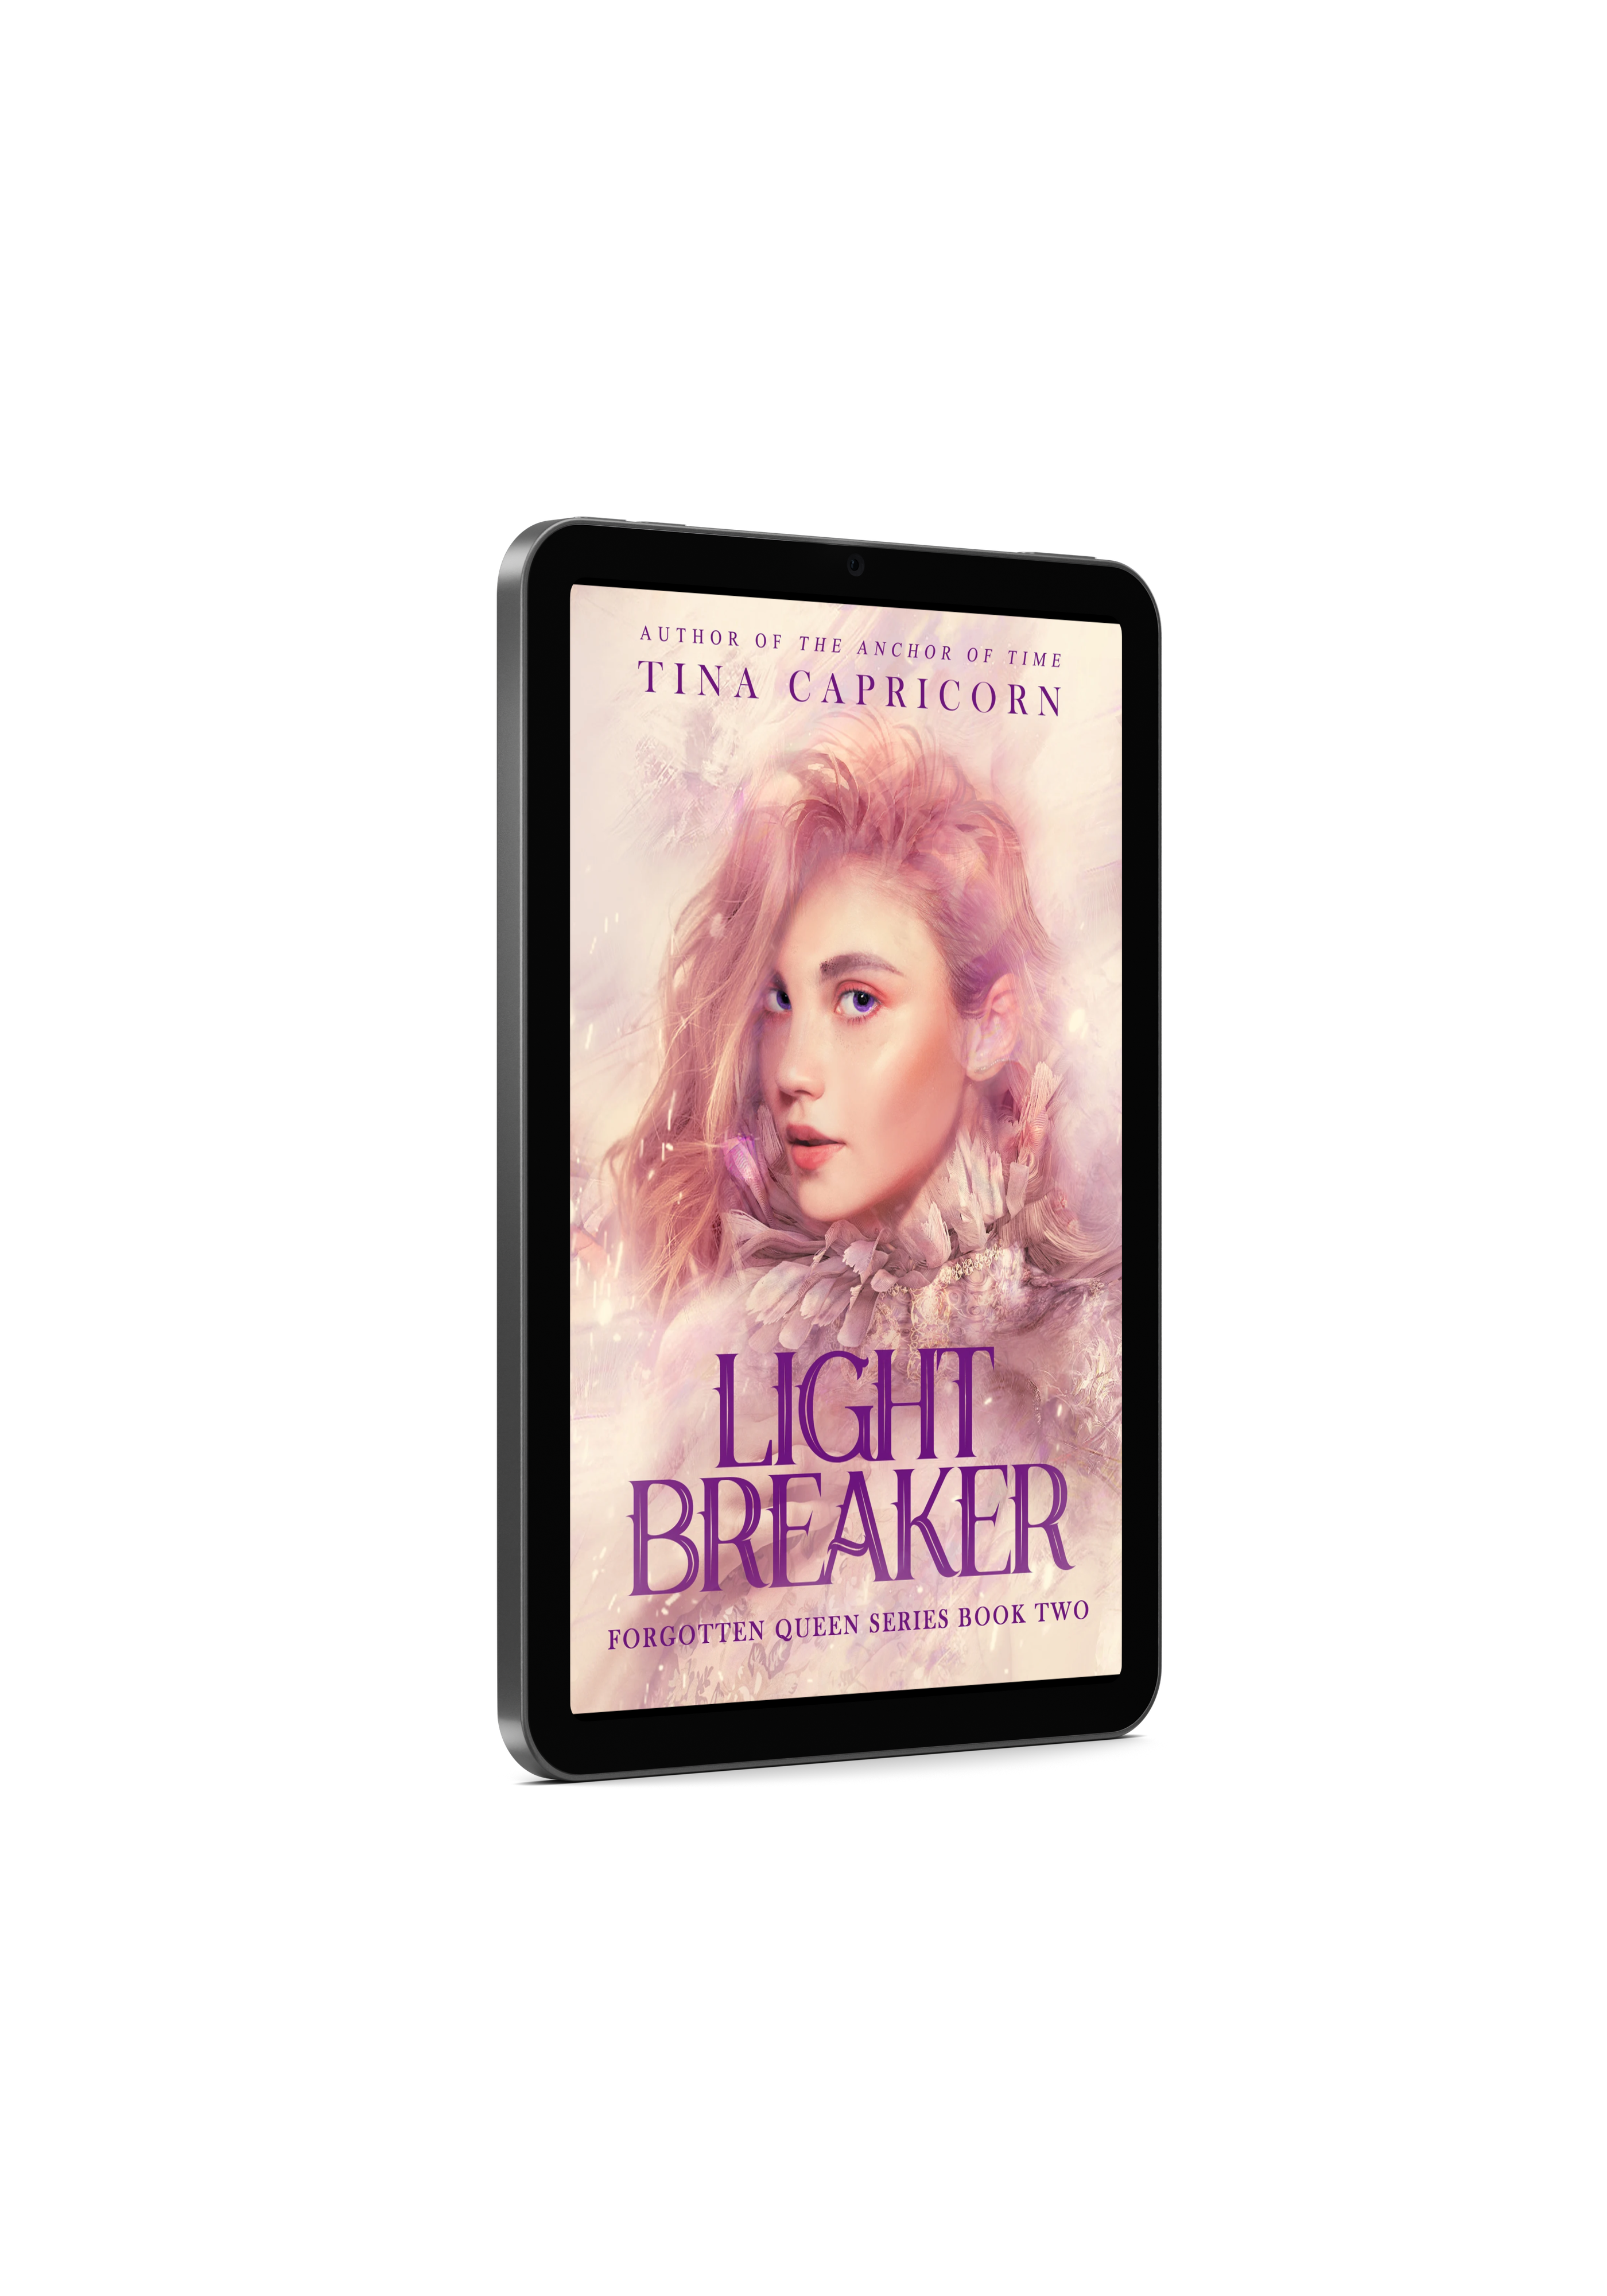 An Ipad mini with the cover of Lightbreaker displayed.